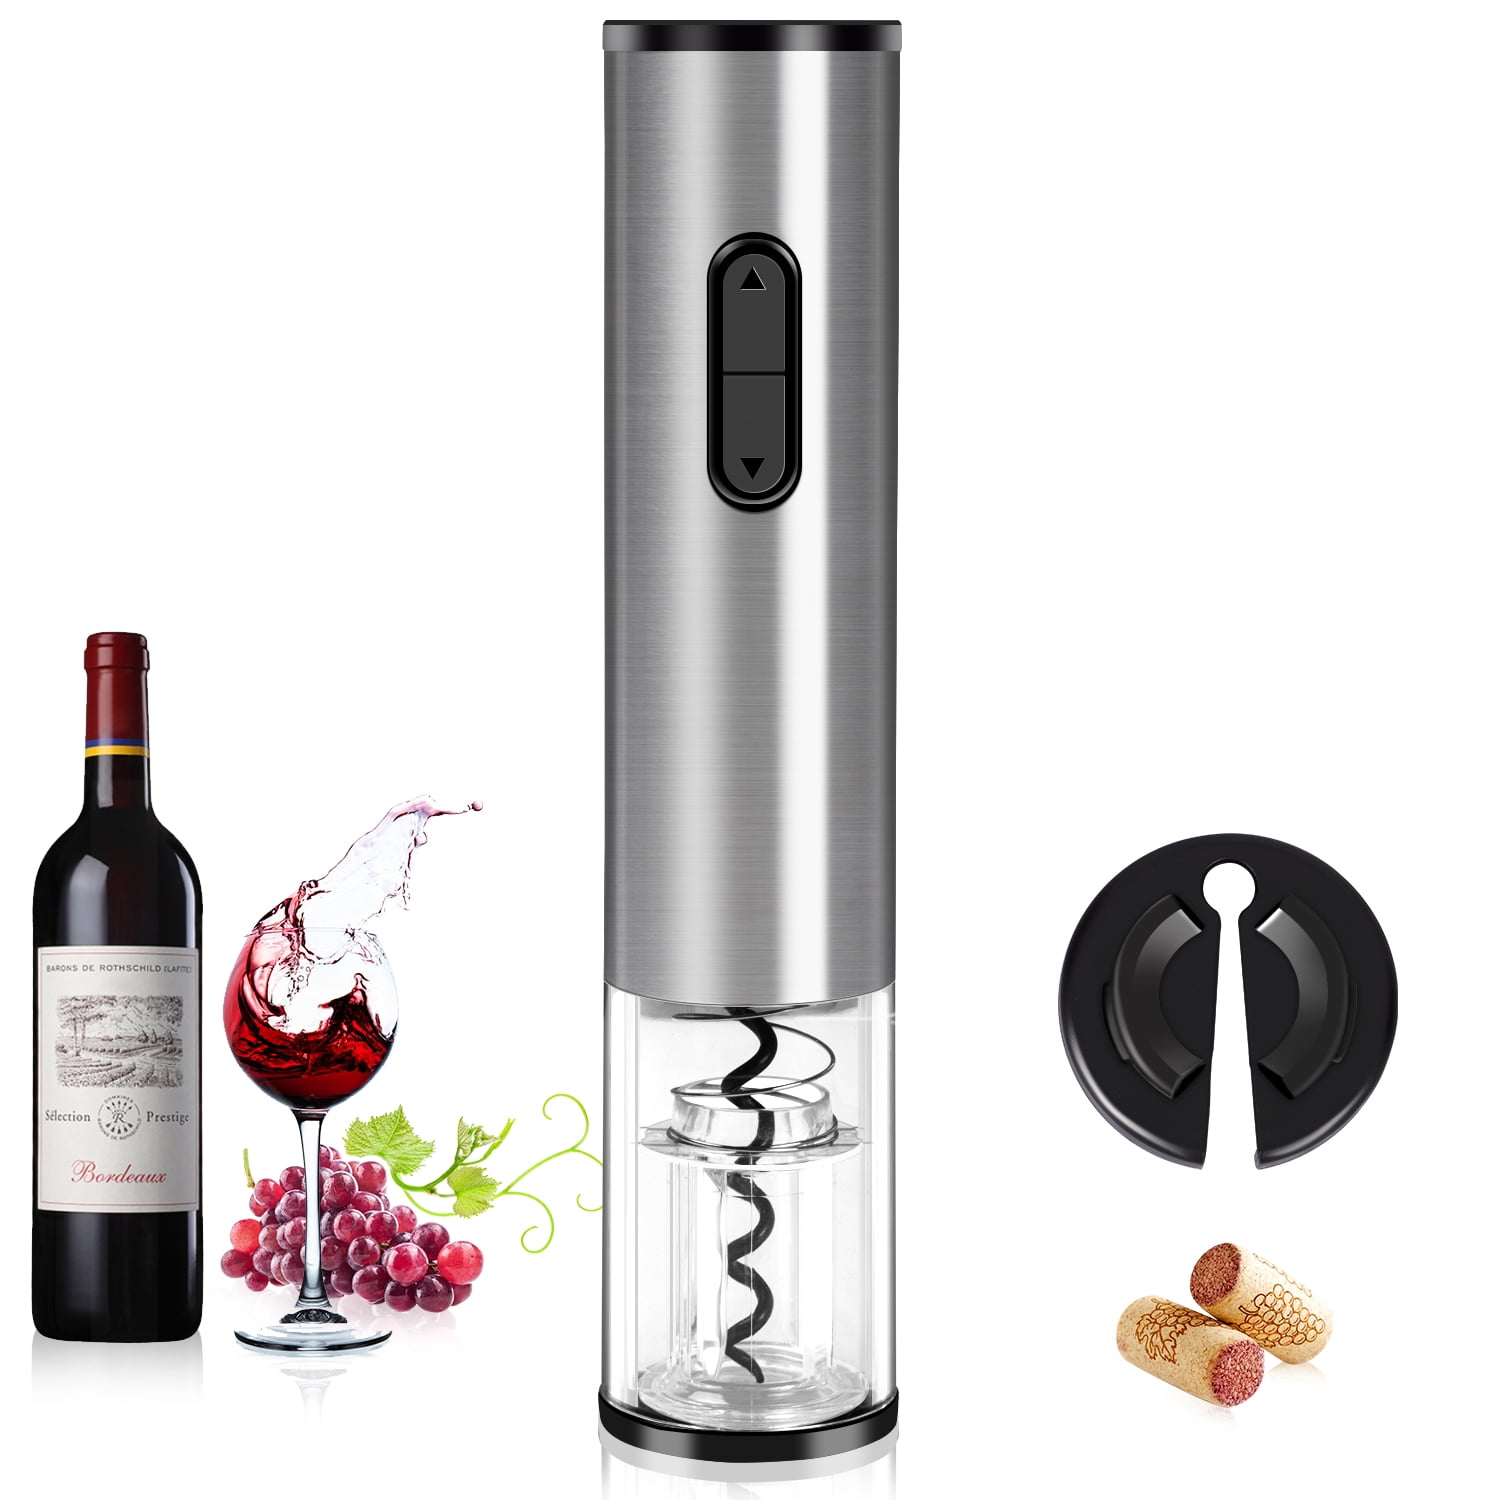 OxGord Electric Wine Opener with Automatic Corkscrew and Foil Remover for Bottles 2016 Newly Designed Model Stainless Steel